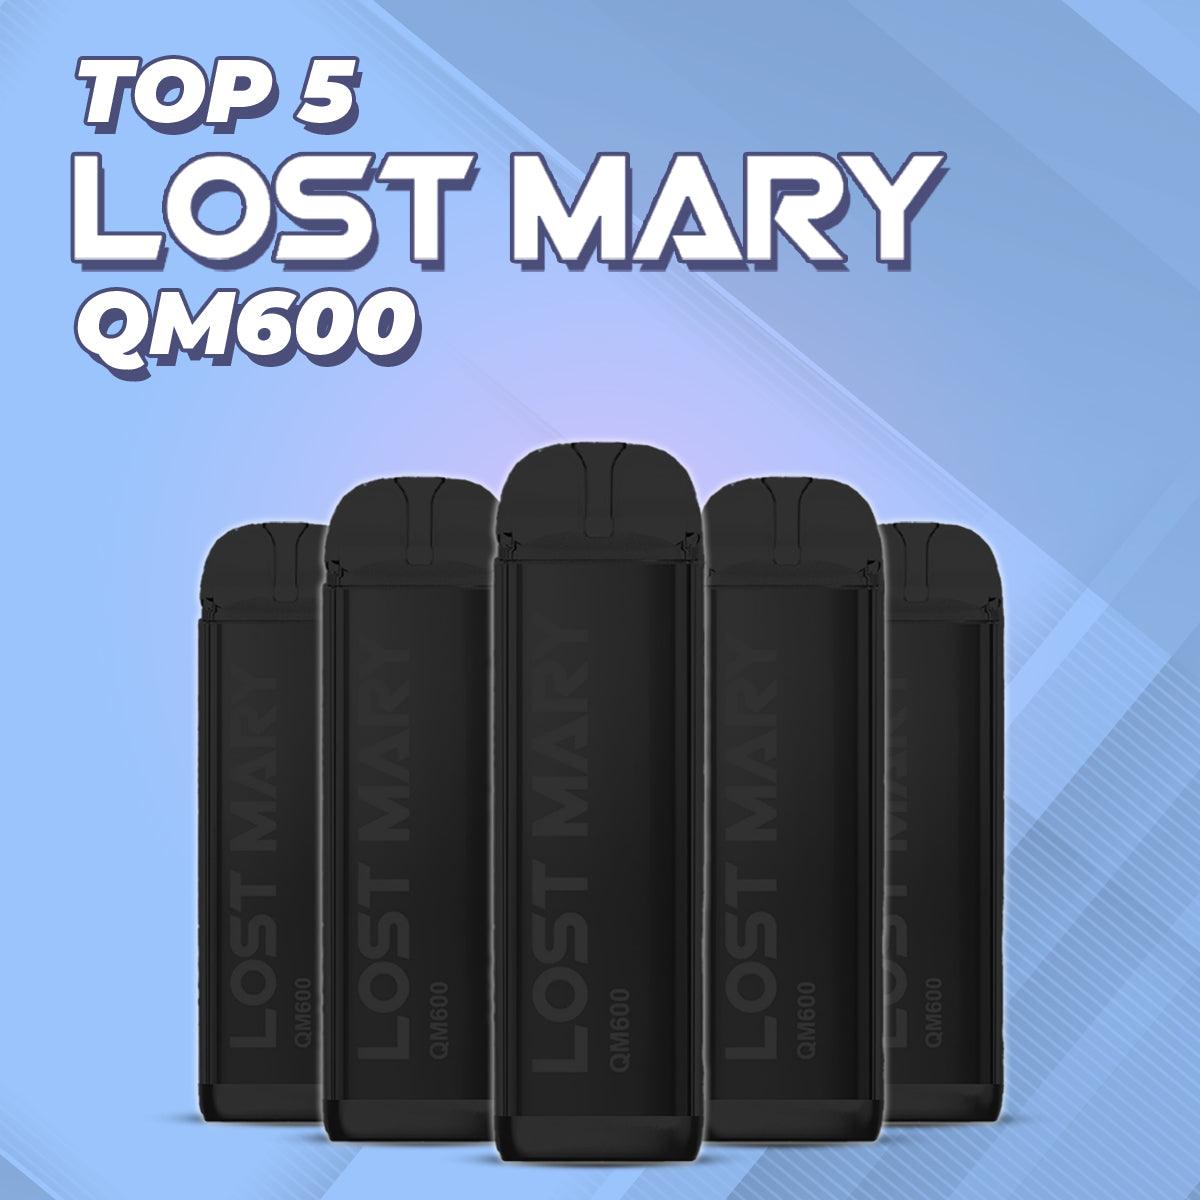 Best Lost Mary QM600 Flavours Ranked